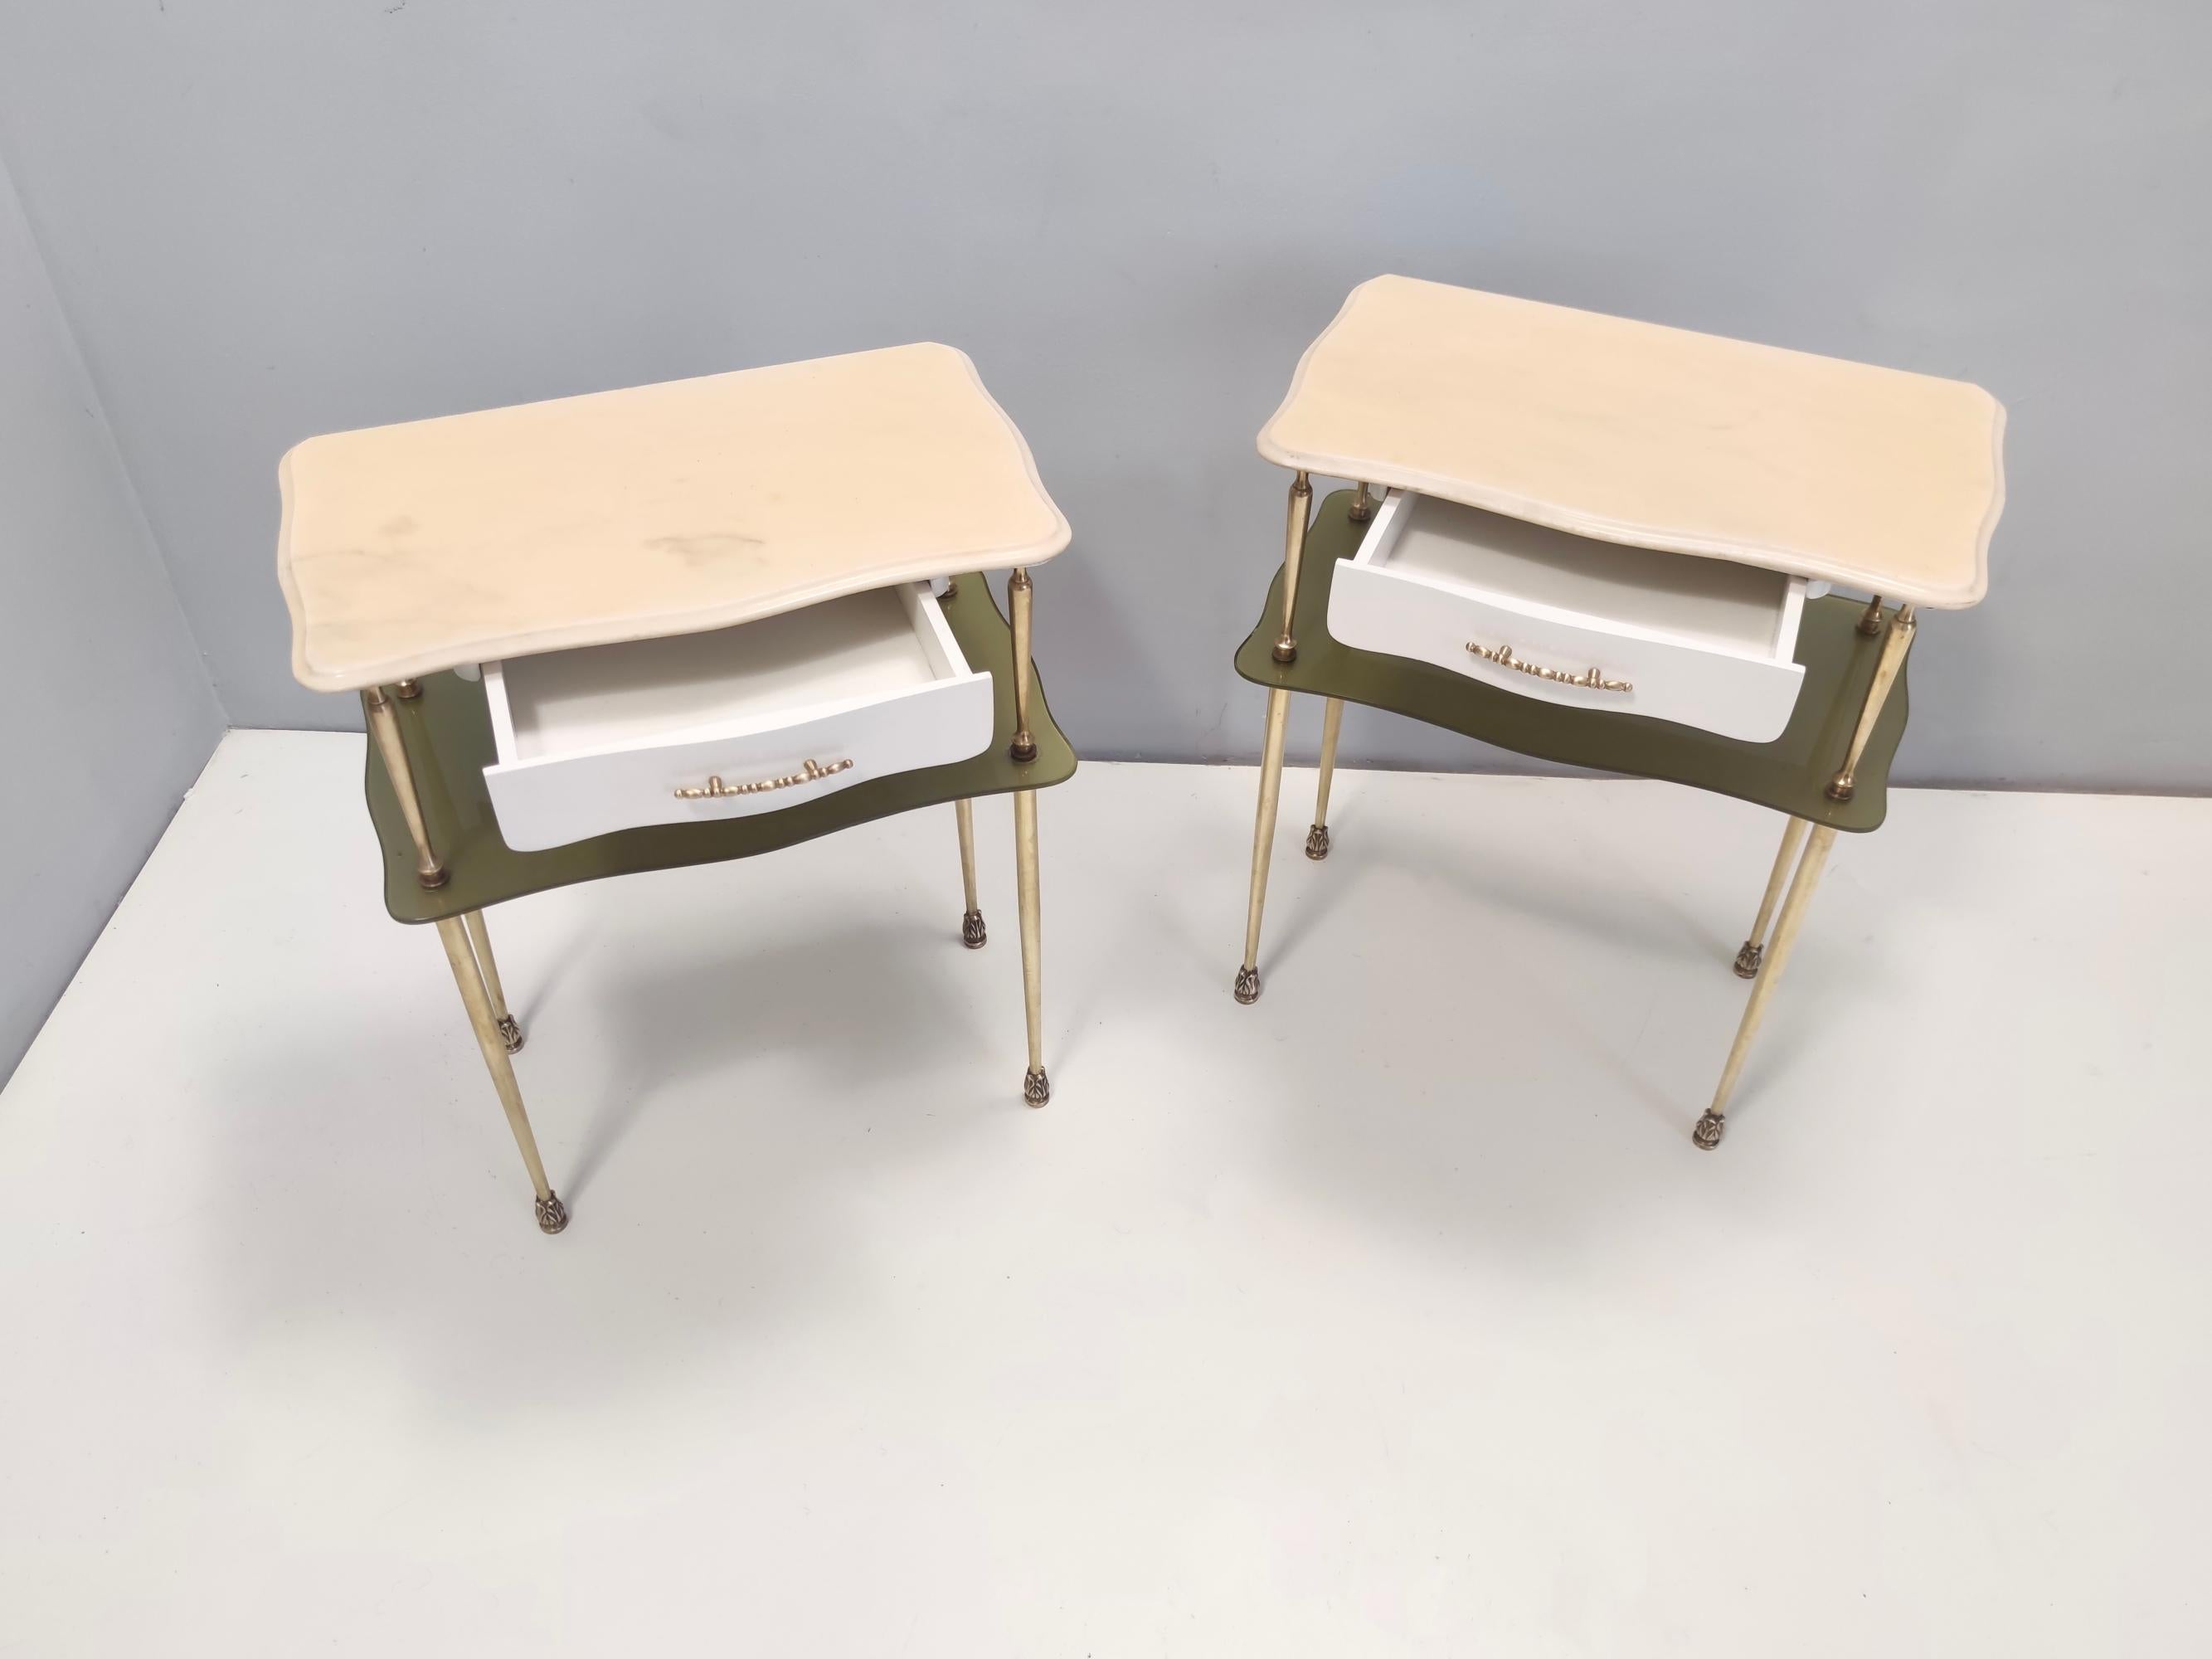 Pair of White Lacquered Nightstands with Marble Tops and Glass Shelves, Italy In Excellent Condition For Sale In Bresso, Lombardy